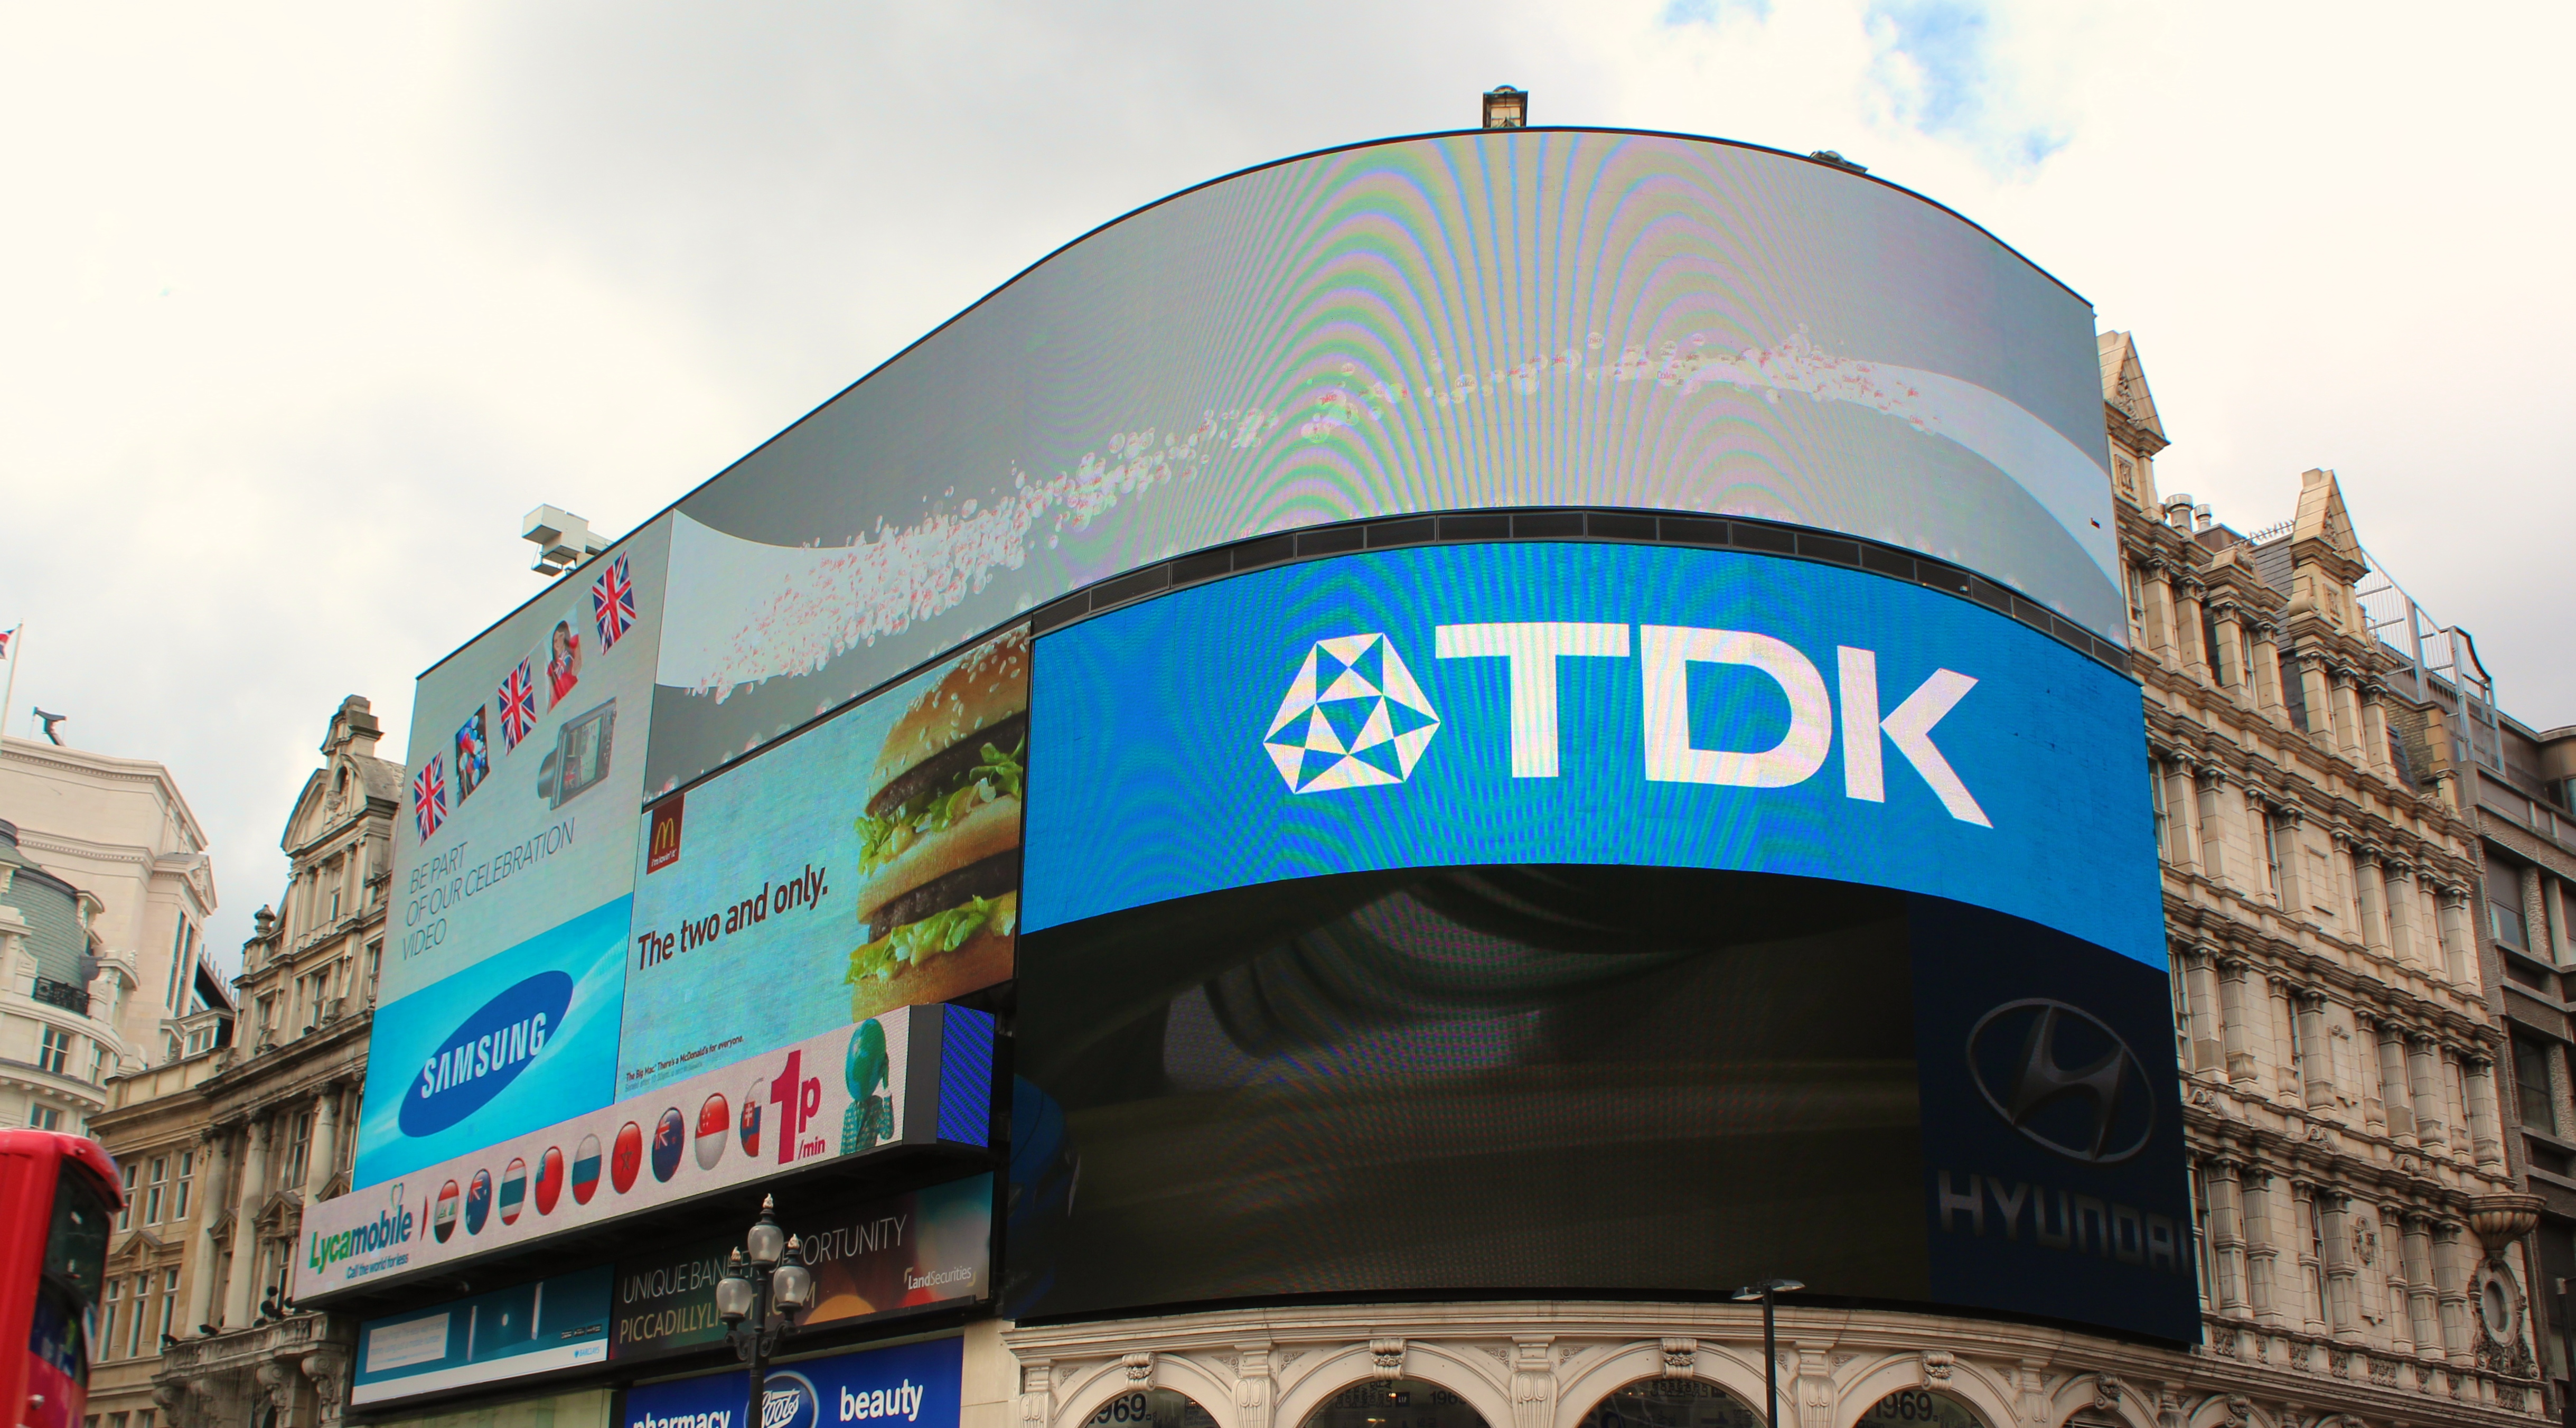 London Places: 10 Facts and Figures About Piccadilly Circus in London